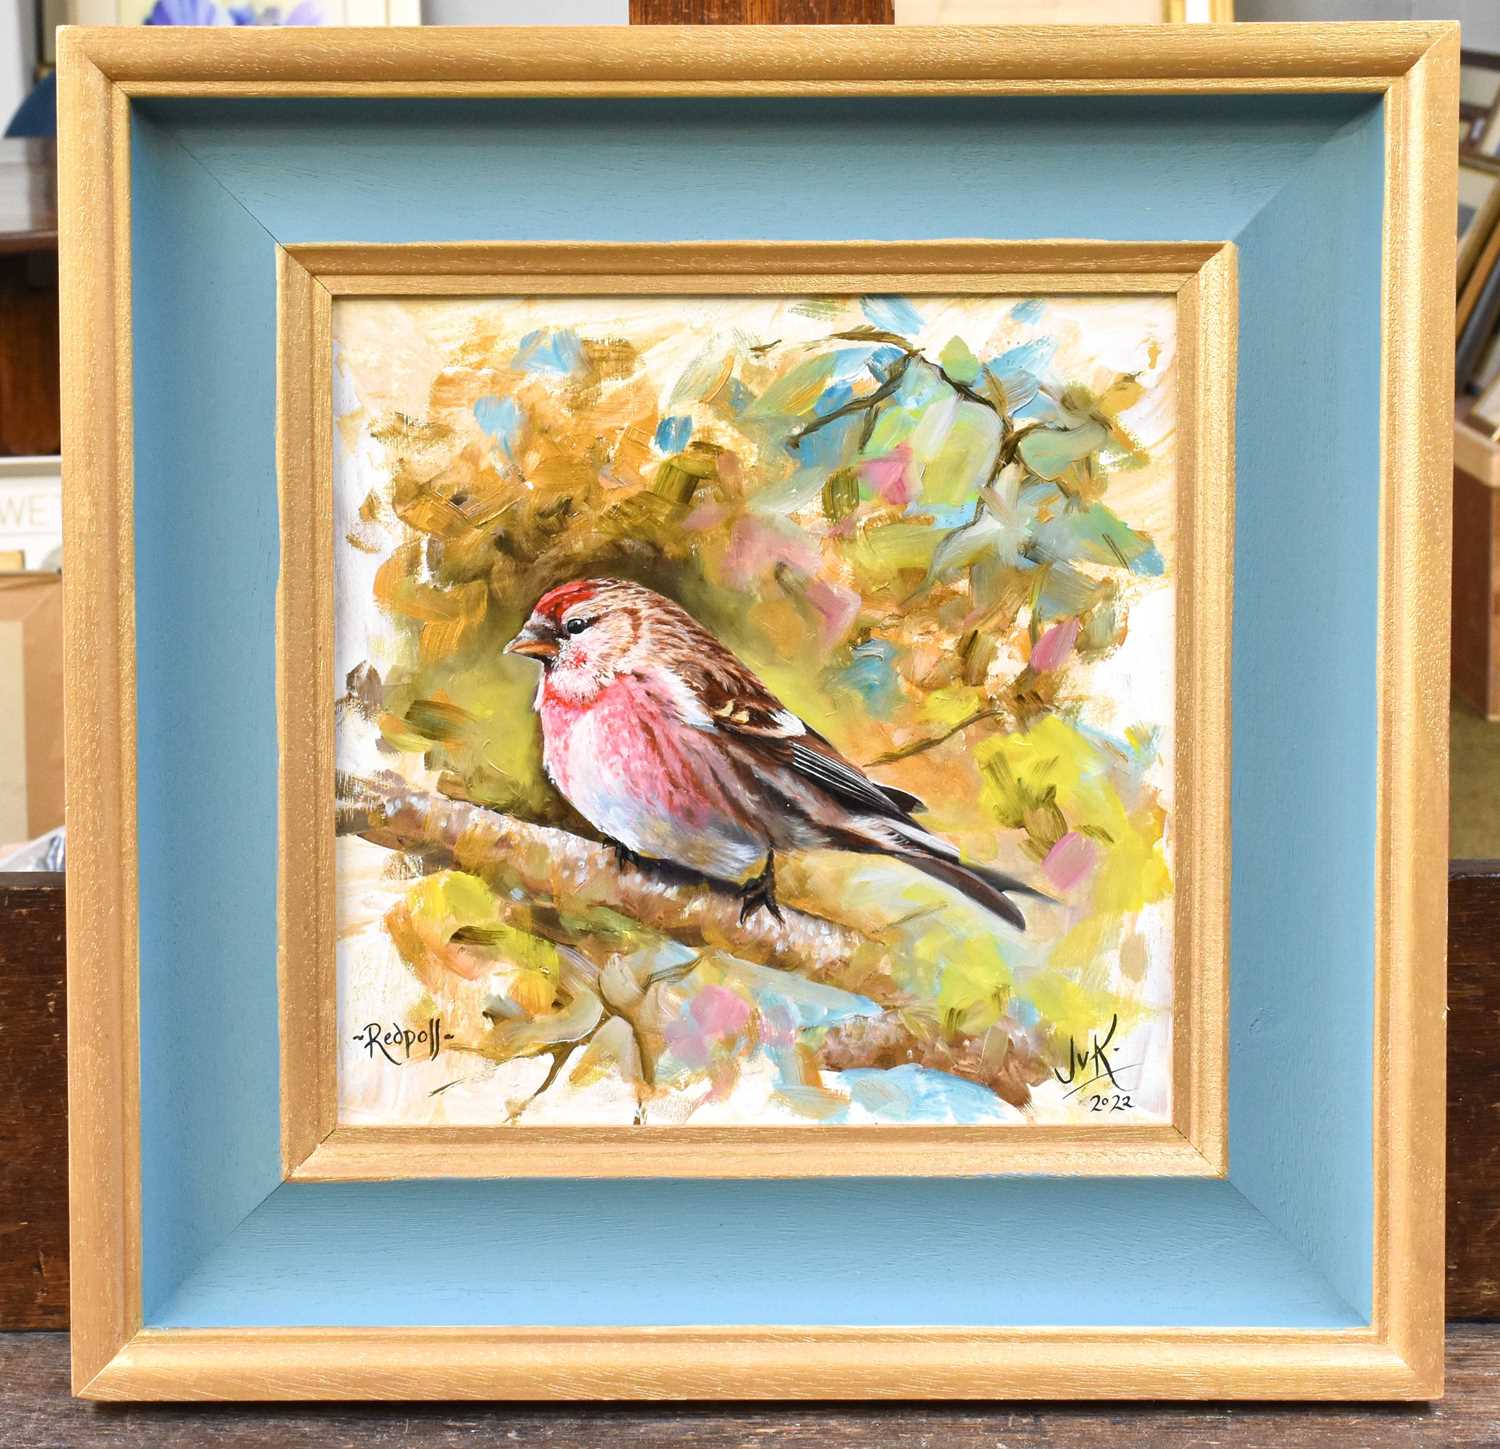 Jo Van Kampen (b.1968) "Redpoll" Signed, inscribed and dated 2022, oil on panel - Image 2 of 2